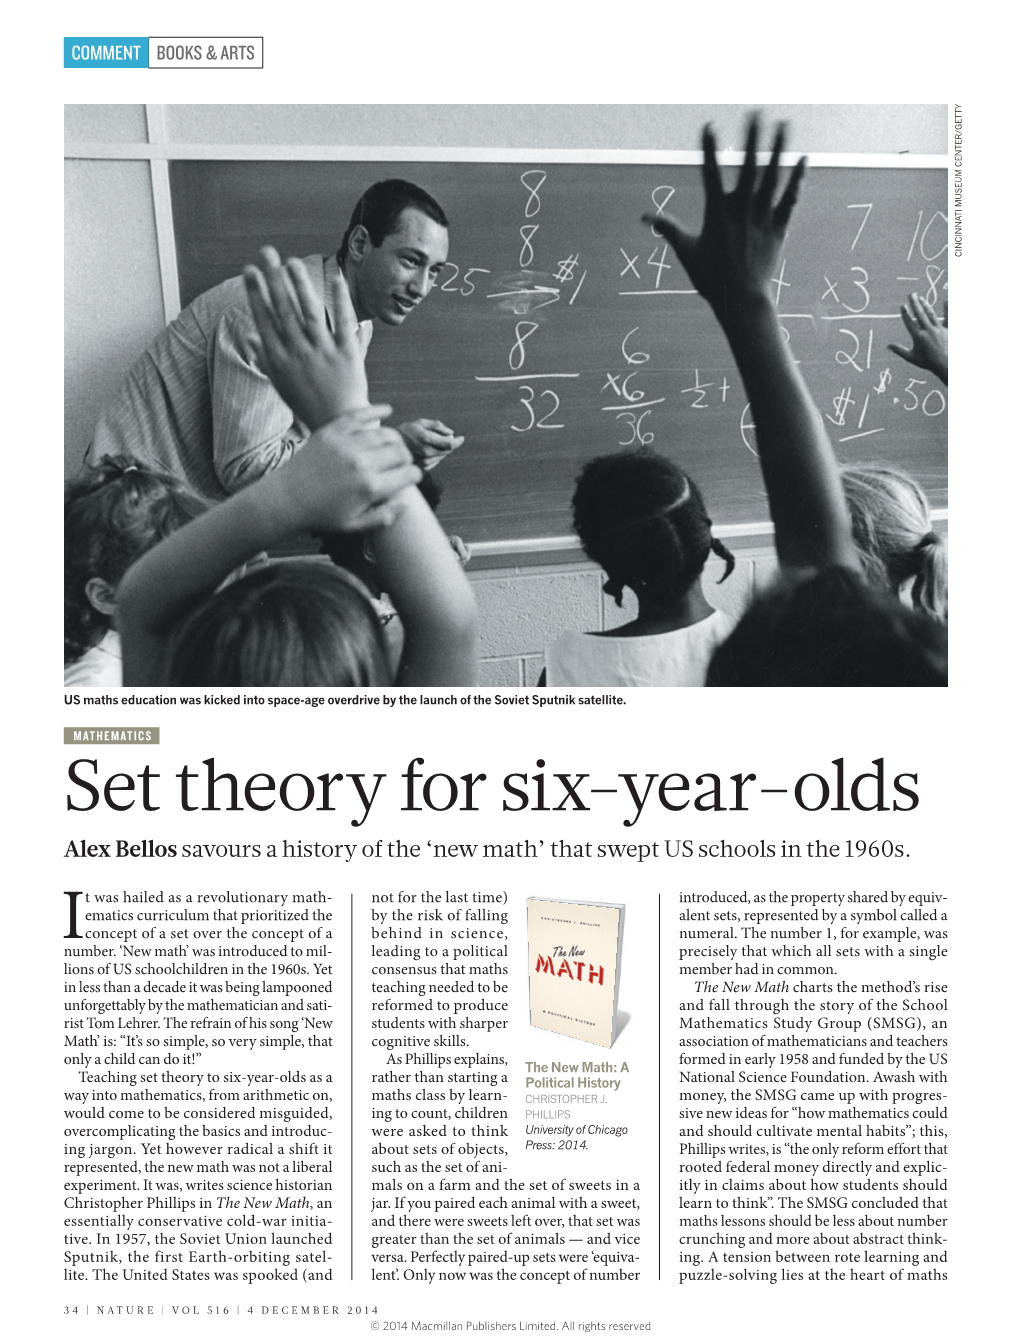 Set Theory for Six-Year-Olds Alex Bellos Savours a History of the ‘New Math’ That Swept US Schools in the 1960S